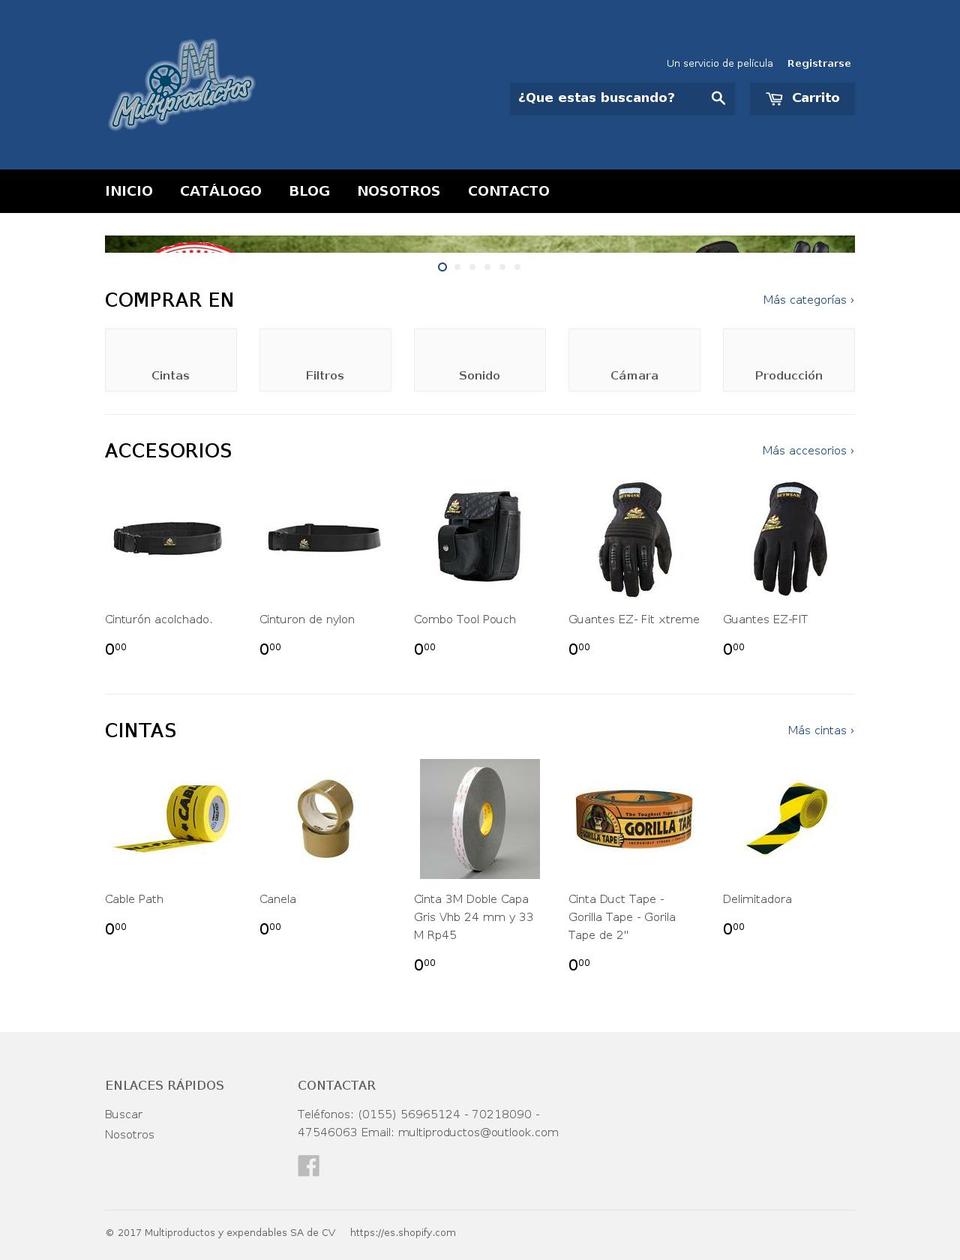 Pursuit Shopify theme site example multiproductosyexpendables.com